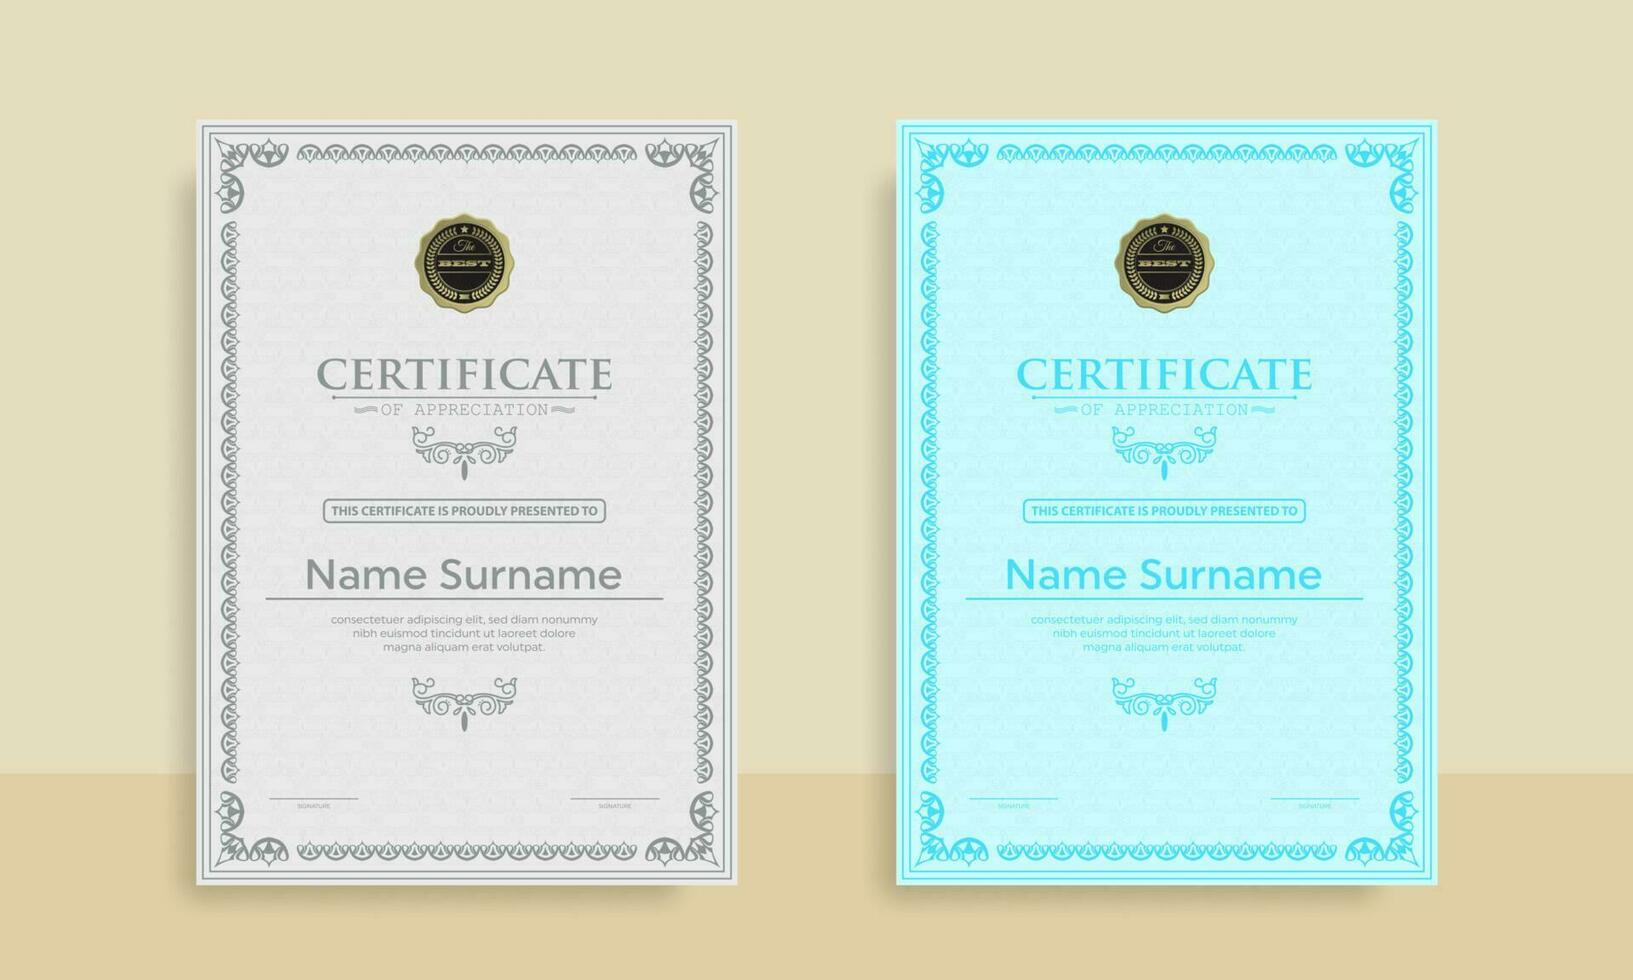 Diploma Certificate of achievement template in vector with Thai outline. Award Templates, achievements for companies, Best Prize Documents. Illustration Templates